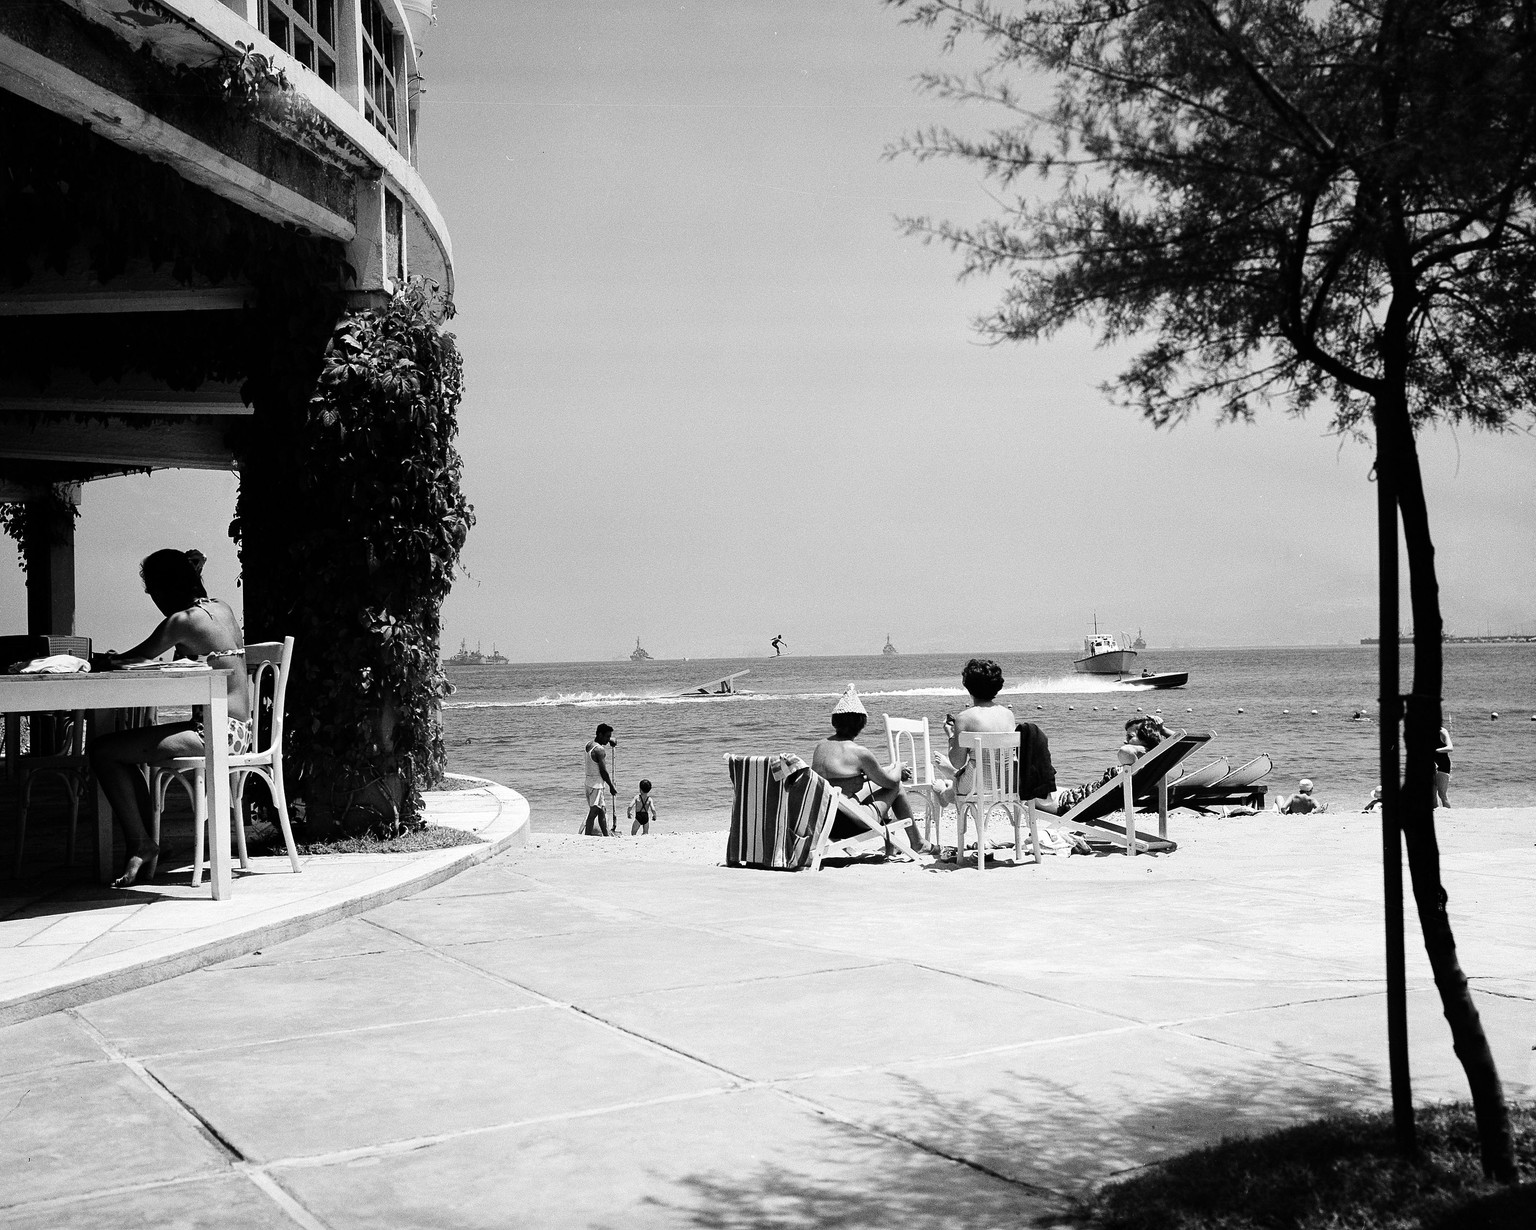 Sunbathers relax and watch water skiers on the St. George Hotel beach in Beirut, Lebanon, July 24, 1958. In the background are American warships, a grim reminder of the trouble that besets this strife ...